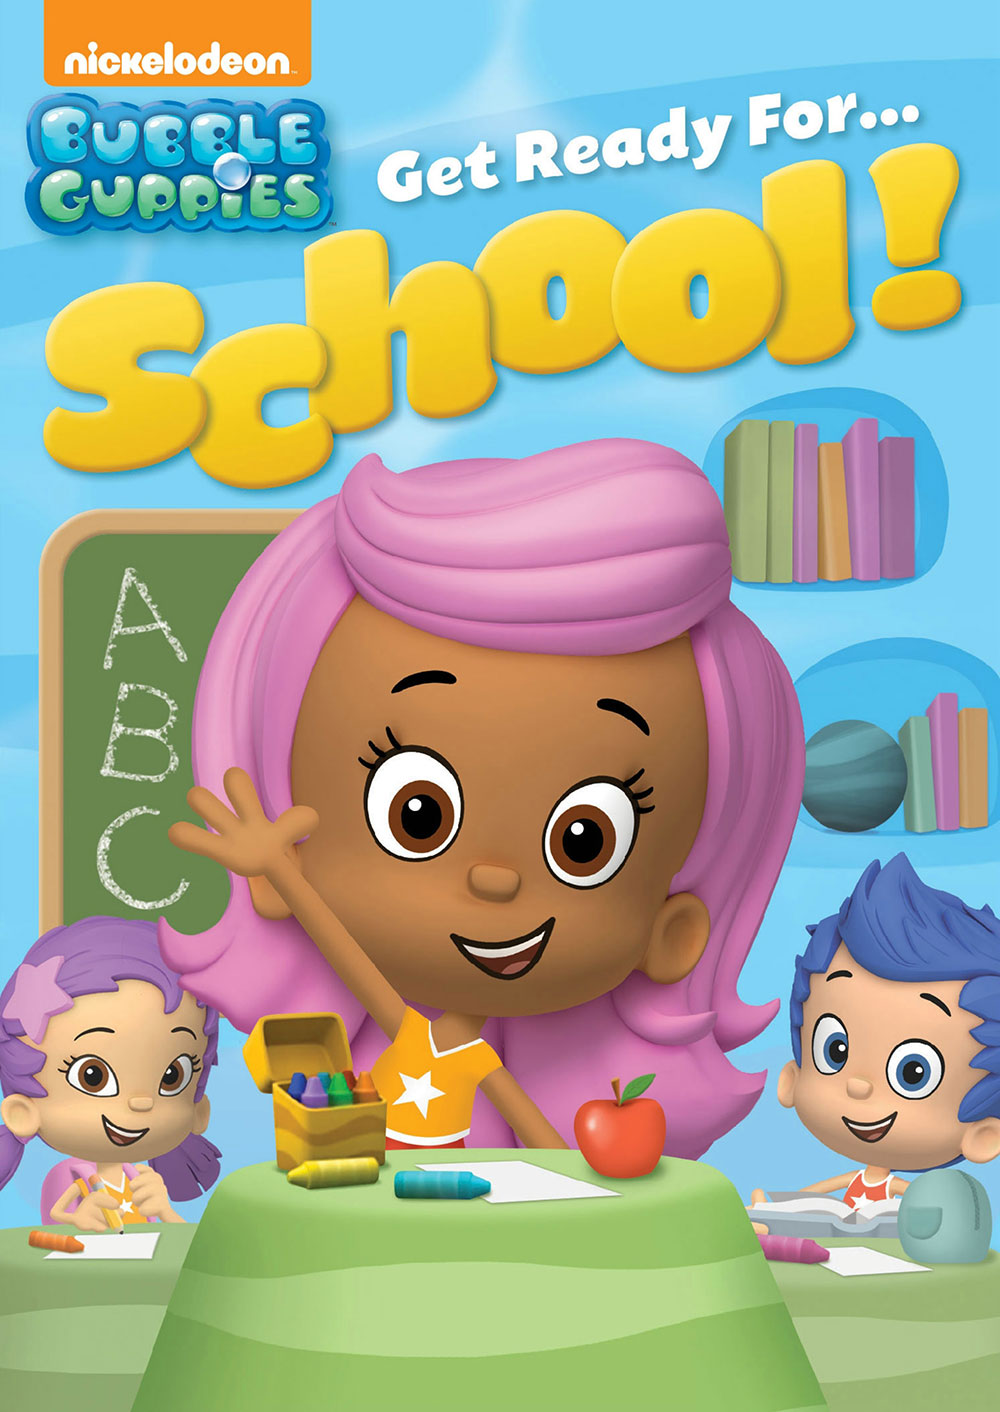 Bubble Guppies: Get Ready For School! Giveaway